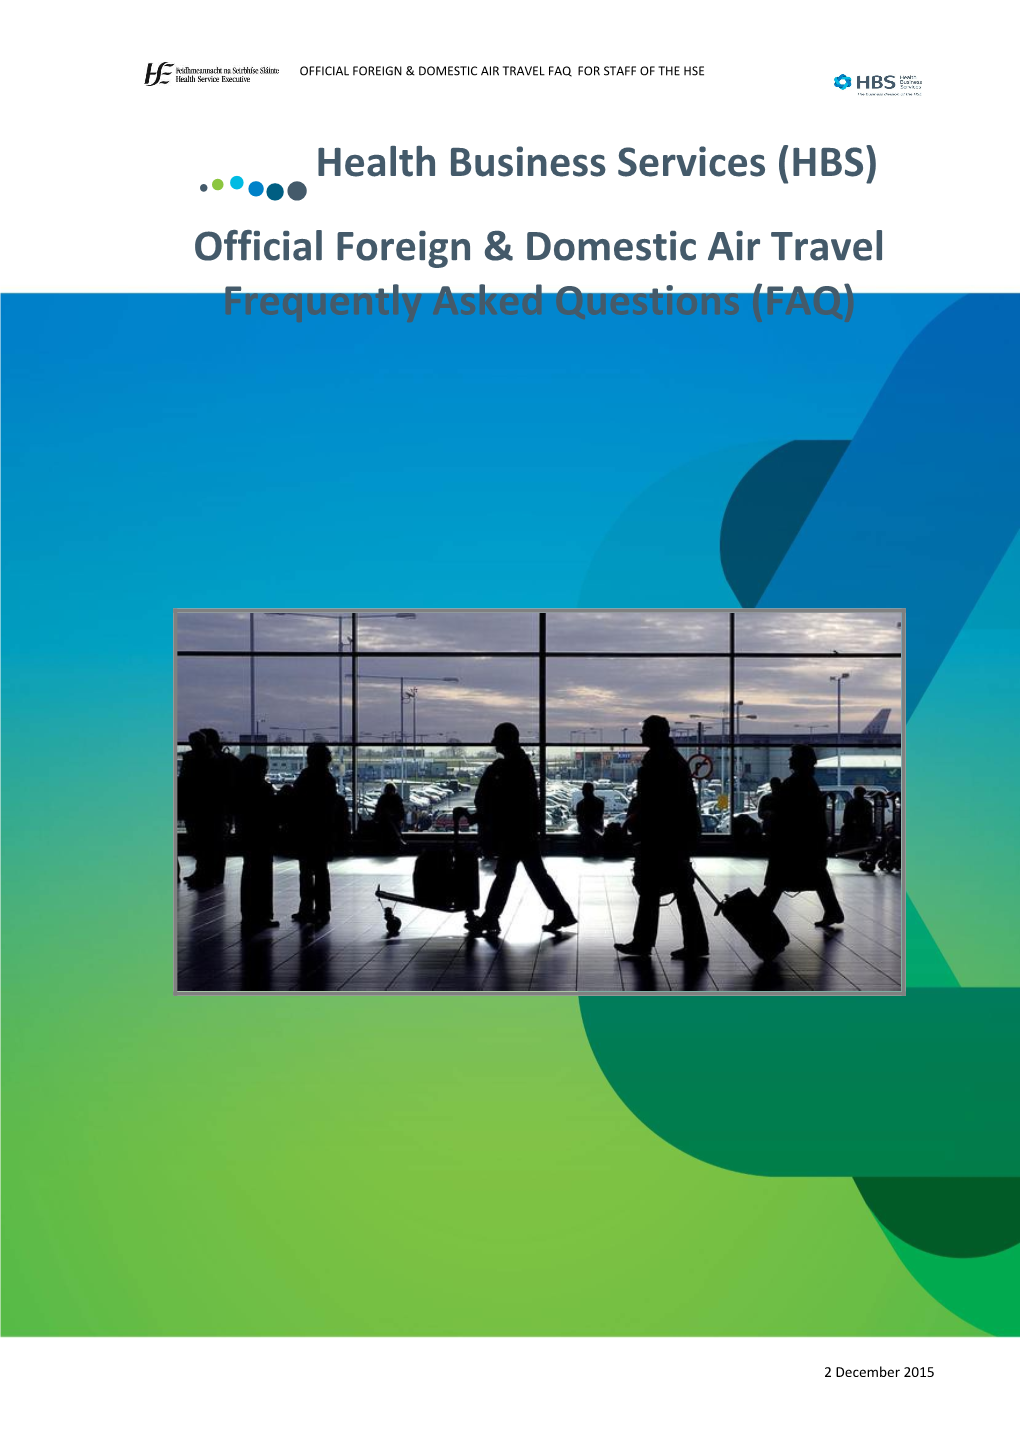 Official Foreign & Domestic Air Travel Frequently Asked Questions (FAQ)